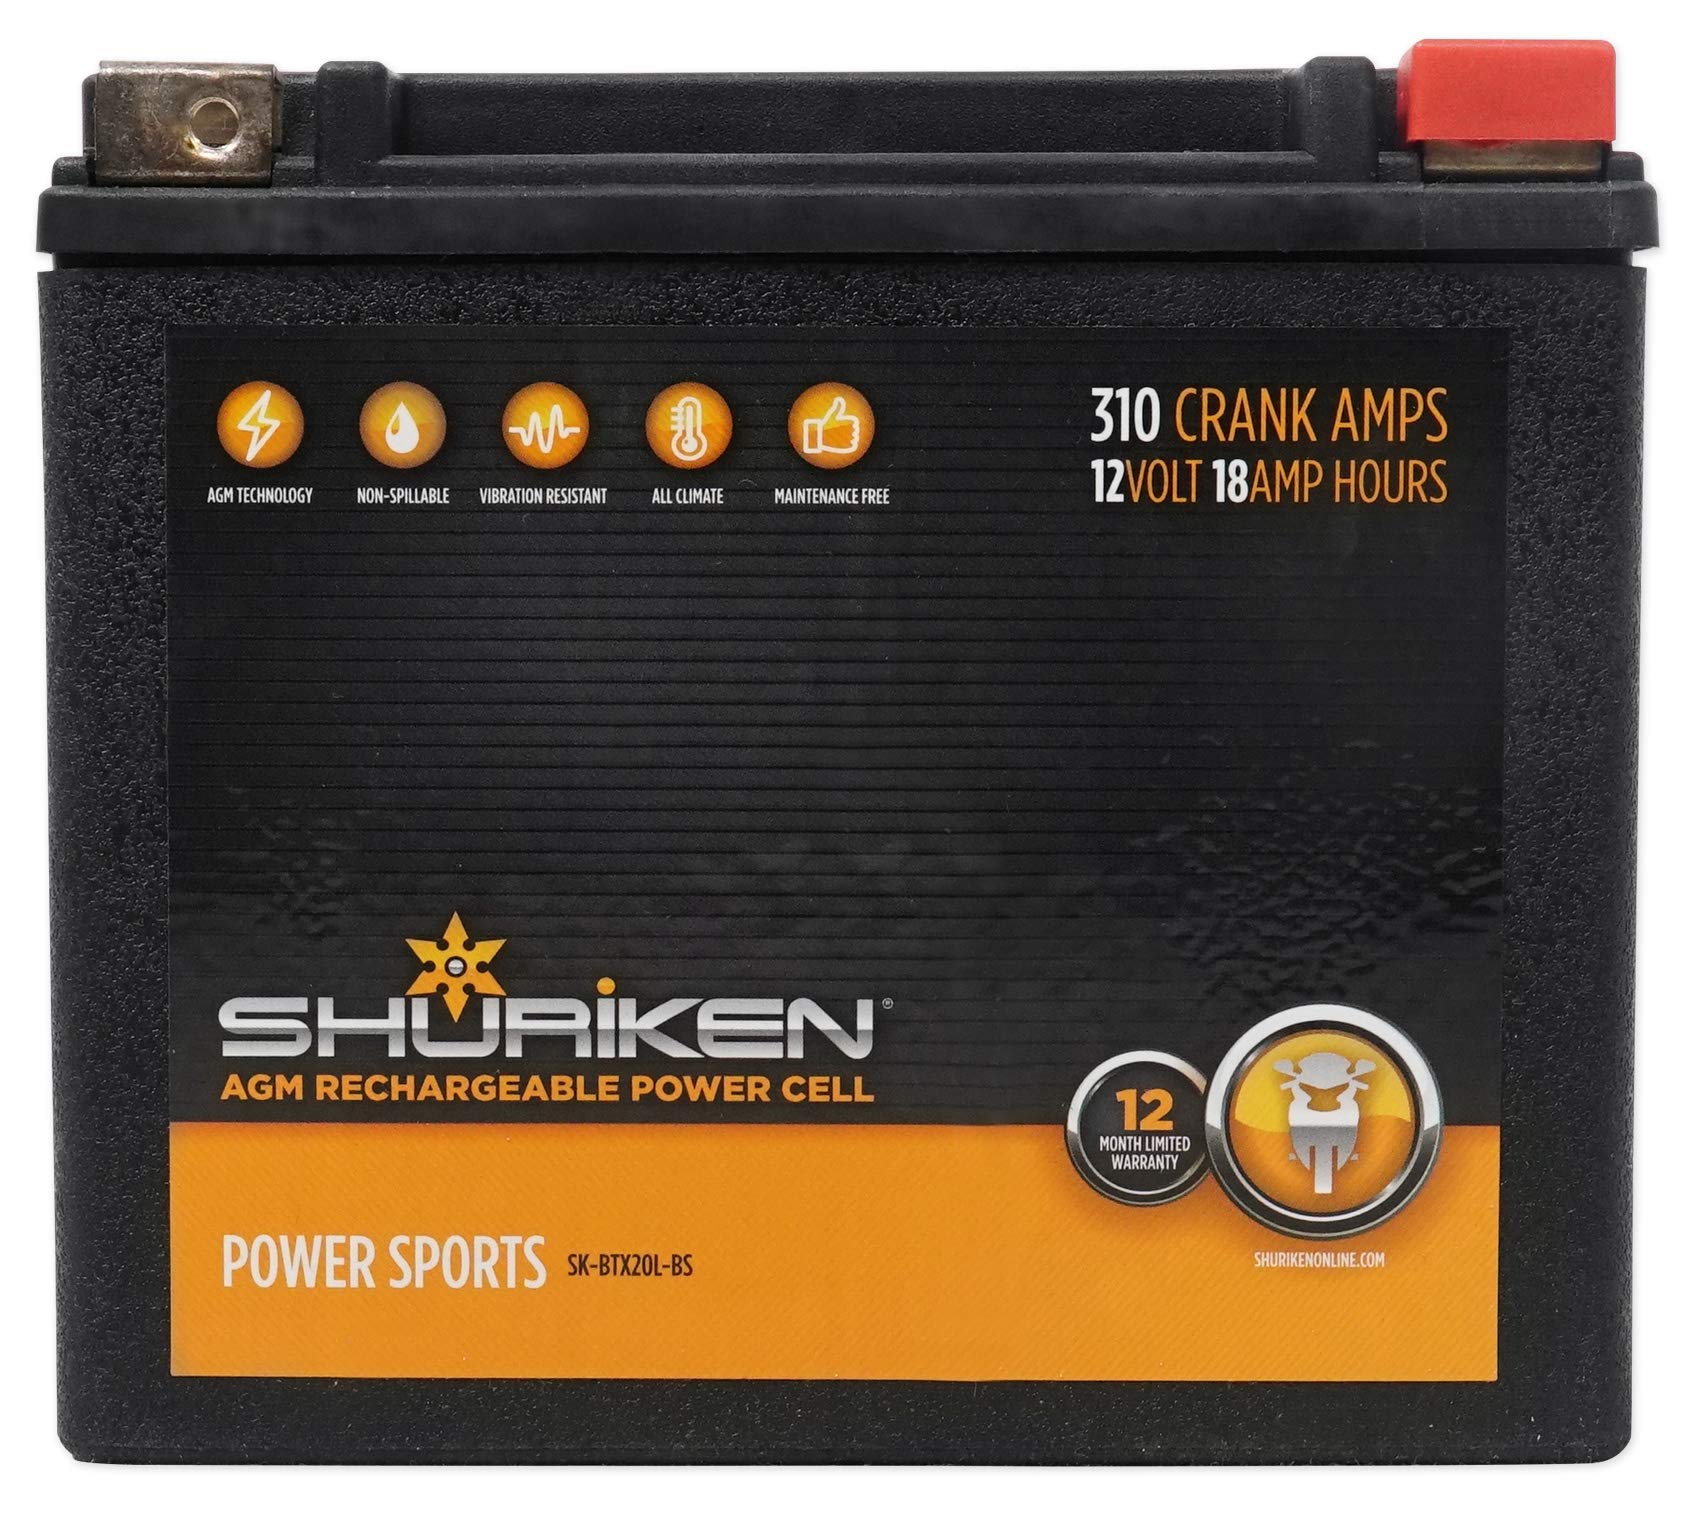 310 CRANK AMPS 18AMP HOURS AGM BATTERY